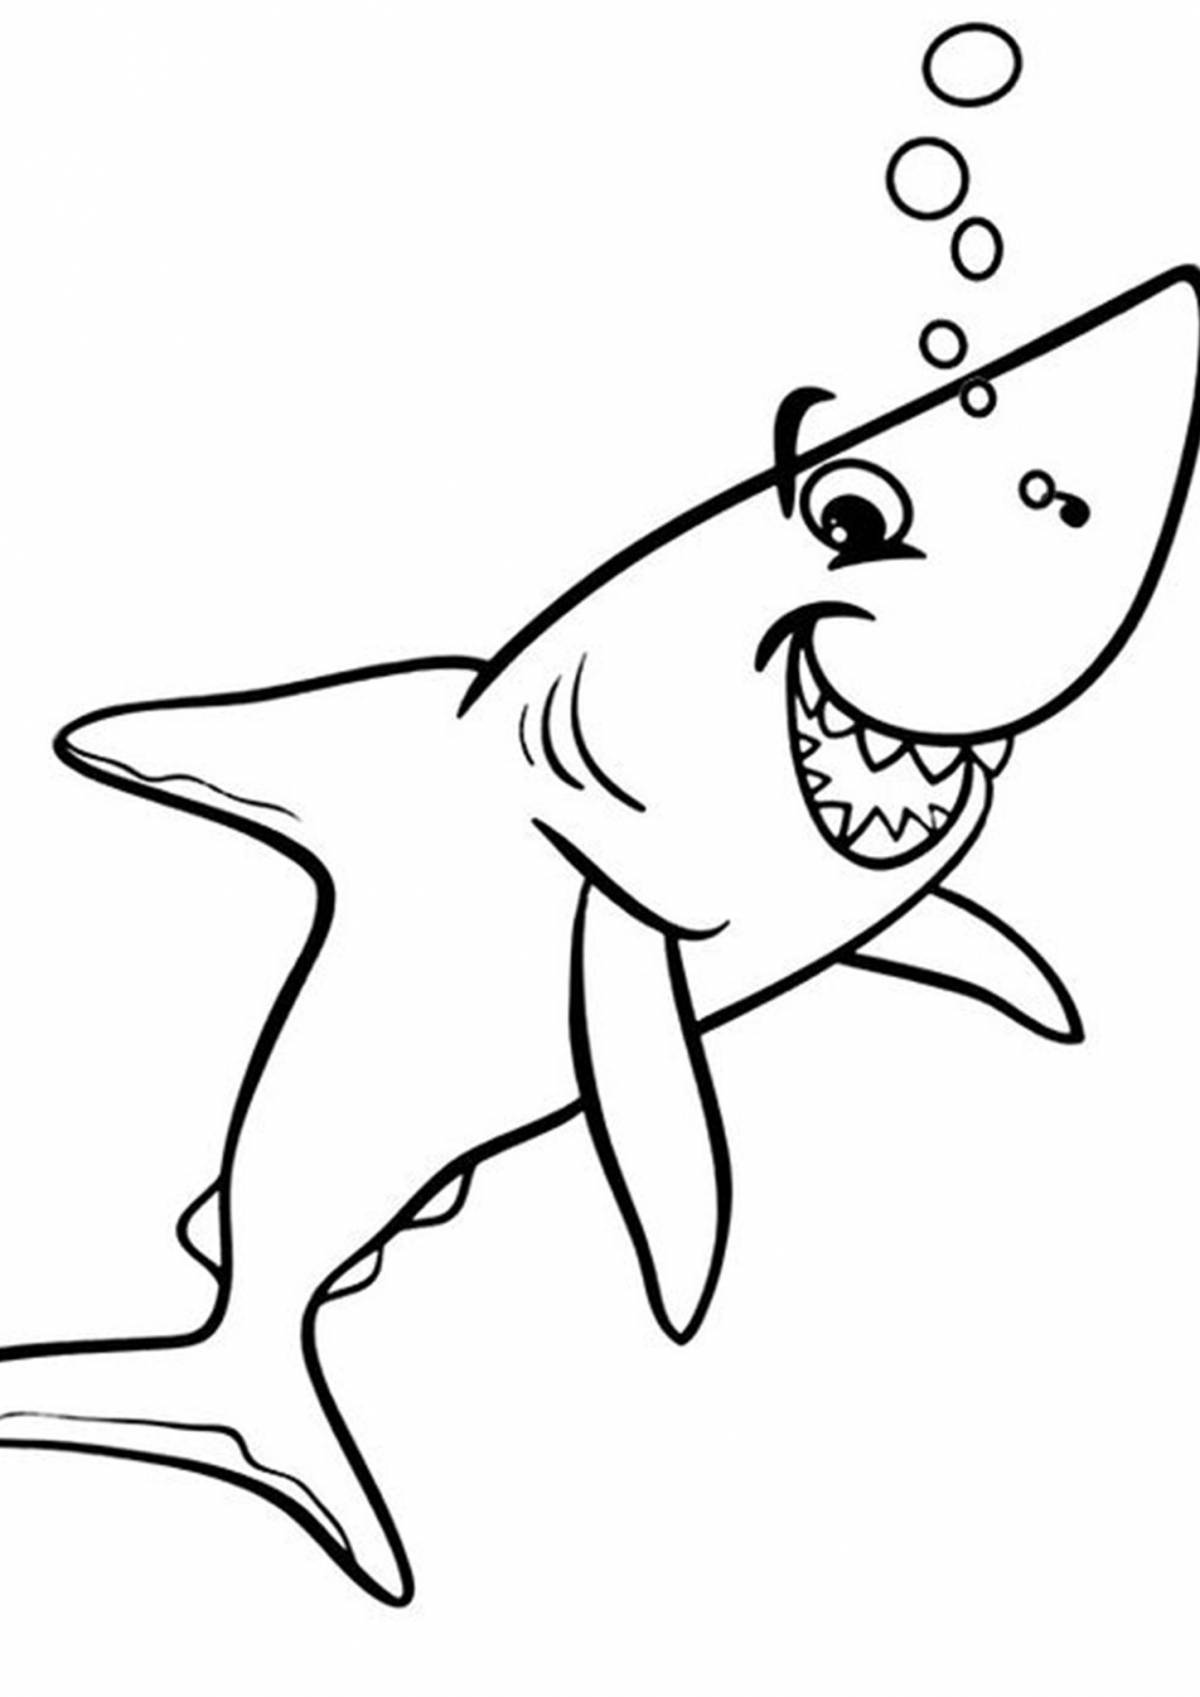 Adorable shark coloring page for kids